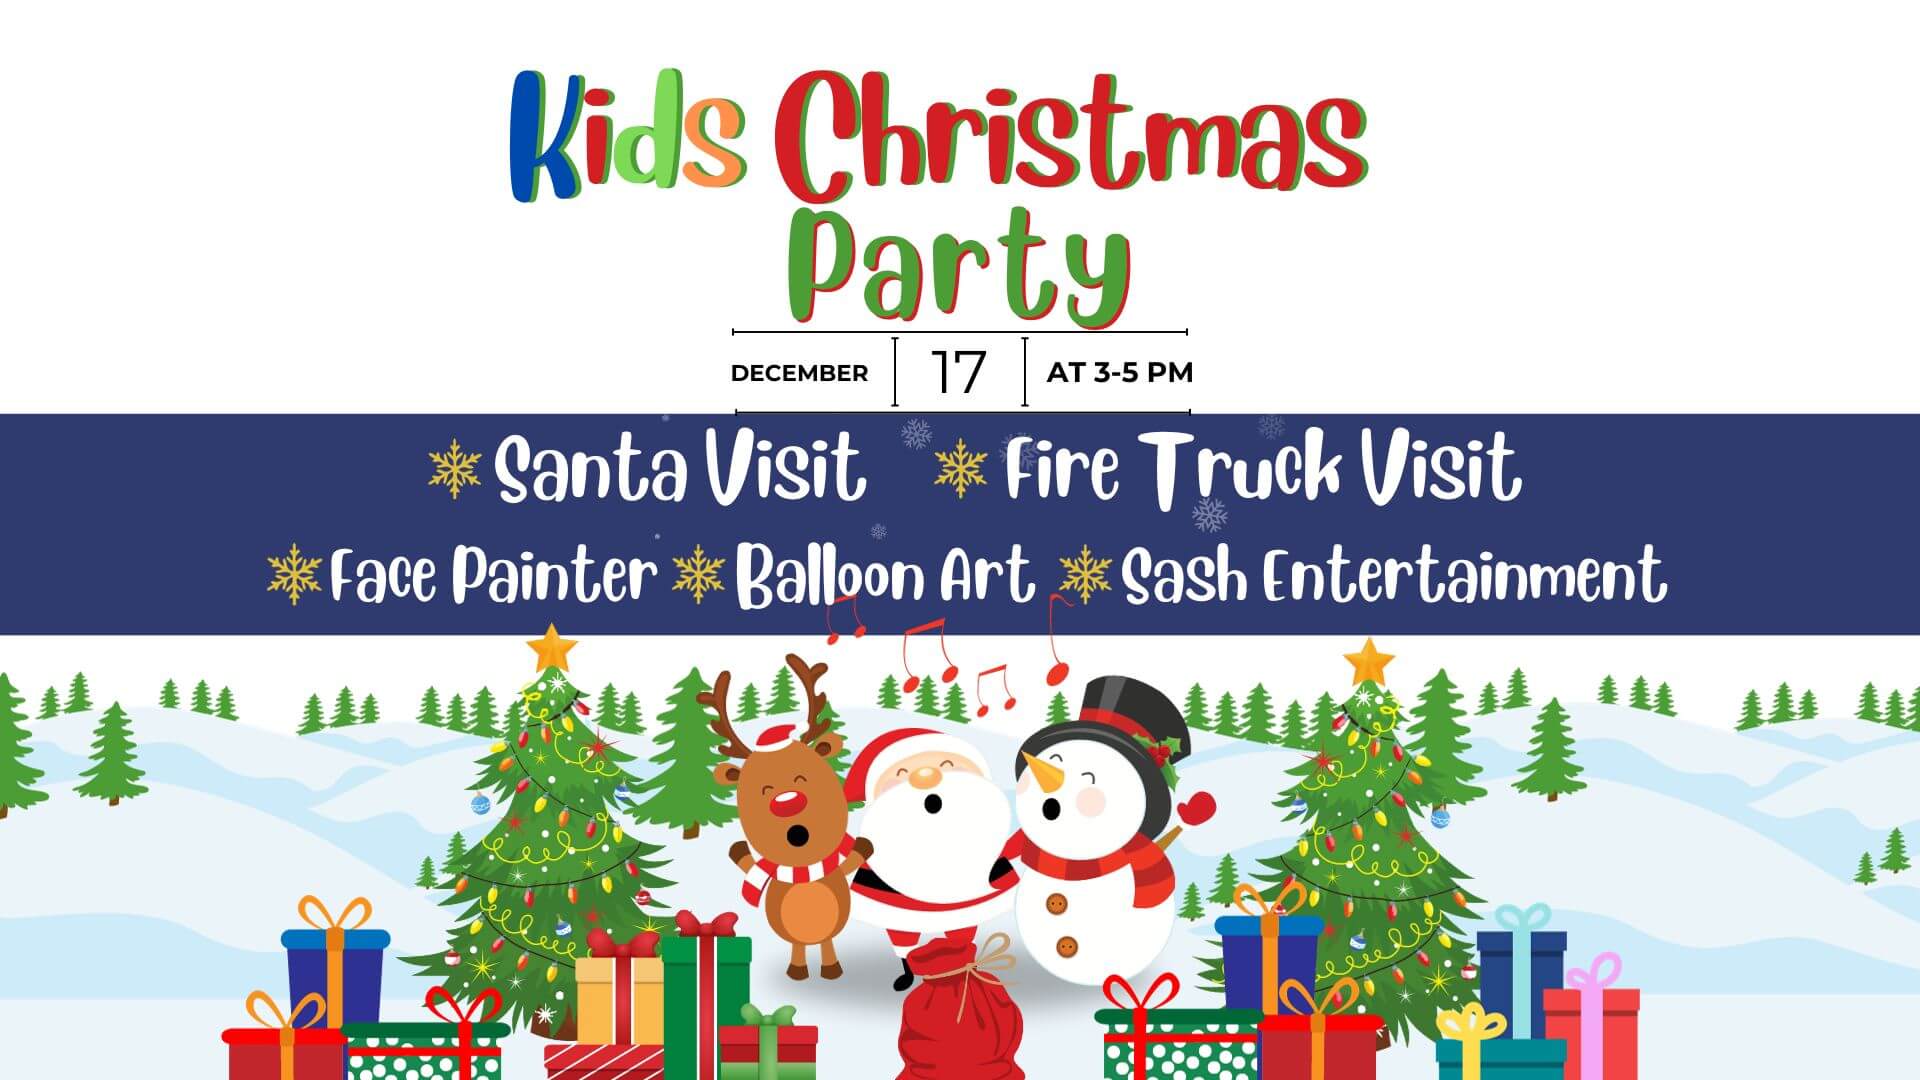 FREE Kids Christmas Party at Hoppers Club!